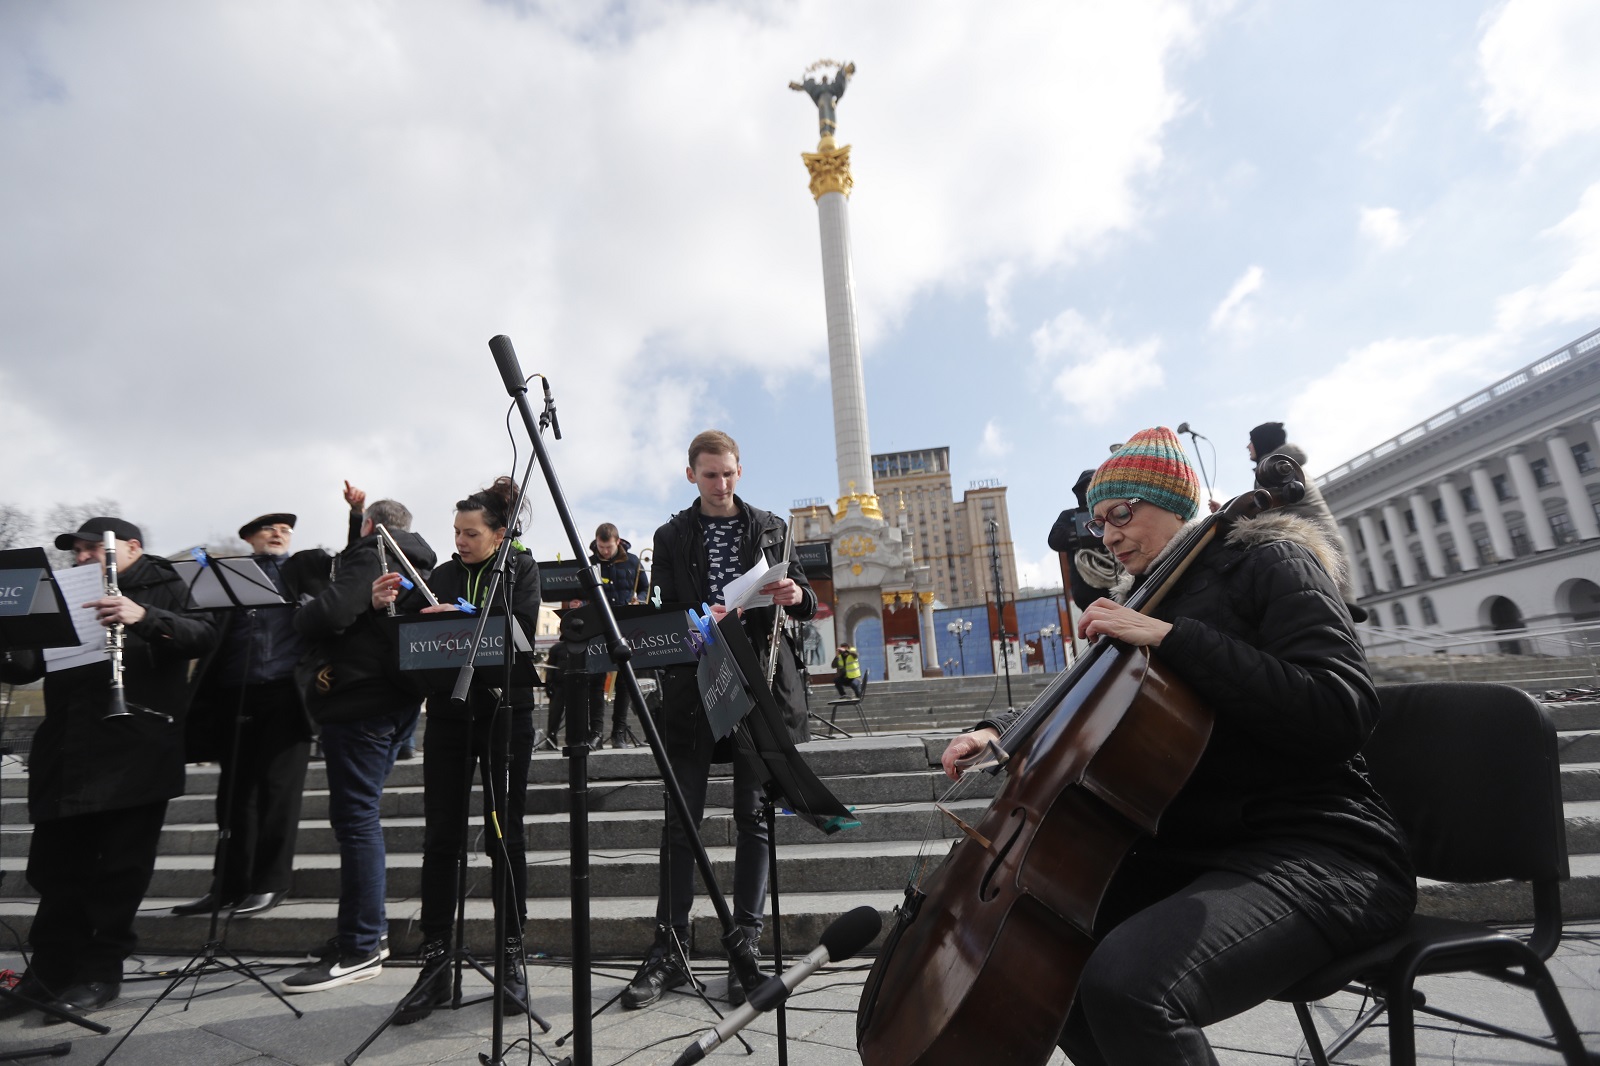 epa09812502 Members of the Kyiv-Classic symphonic orchestra perform demanding to close the sky over Ukraine at the Independence Square in Kyiv (Kiev), Ukraine, 09 March 2022. According to the United Nations High Commissioner for Refugees (UNHCR), Russia's military invasion of Ukraine, which started on 24 February, has caused destruction of civilian infrastructure as well as civilian casualties, with tens of thousands internally displaced and over two million refugees fleeing Ukraine.  EPA/ZURAB KURTSIKIDZE